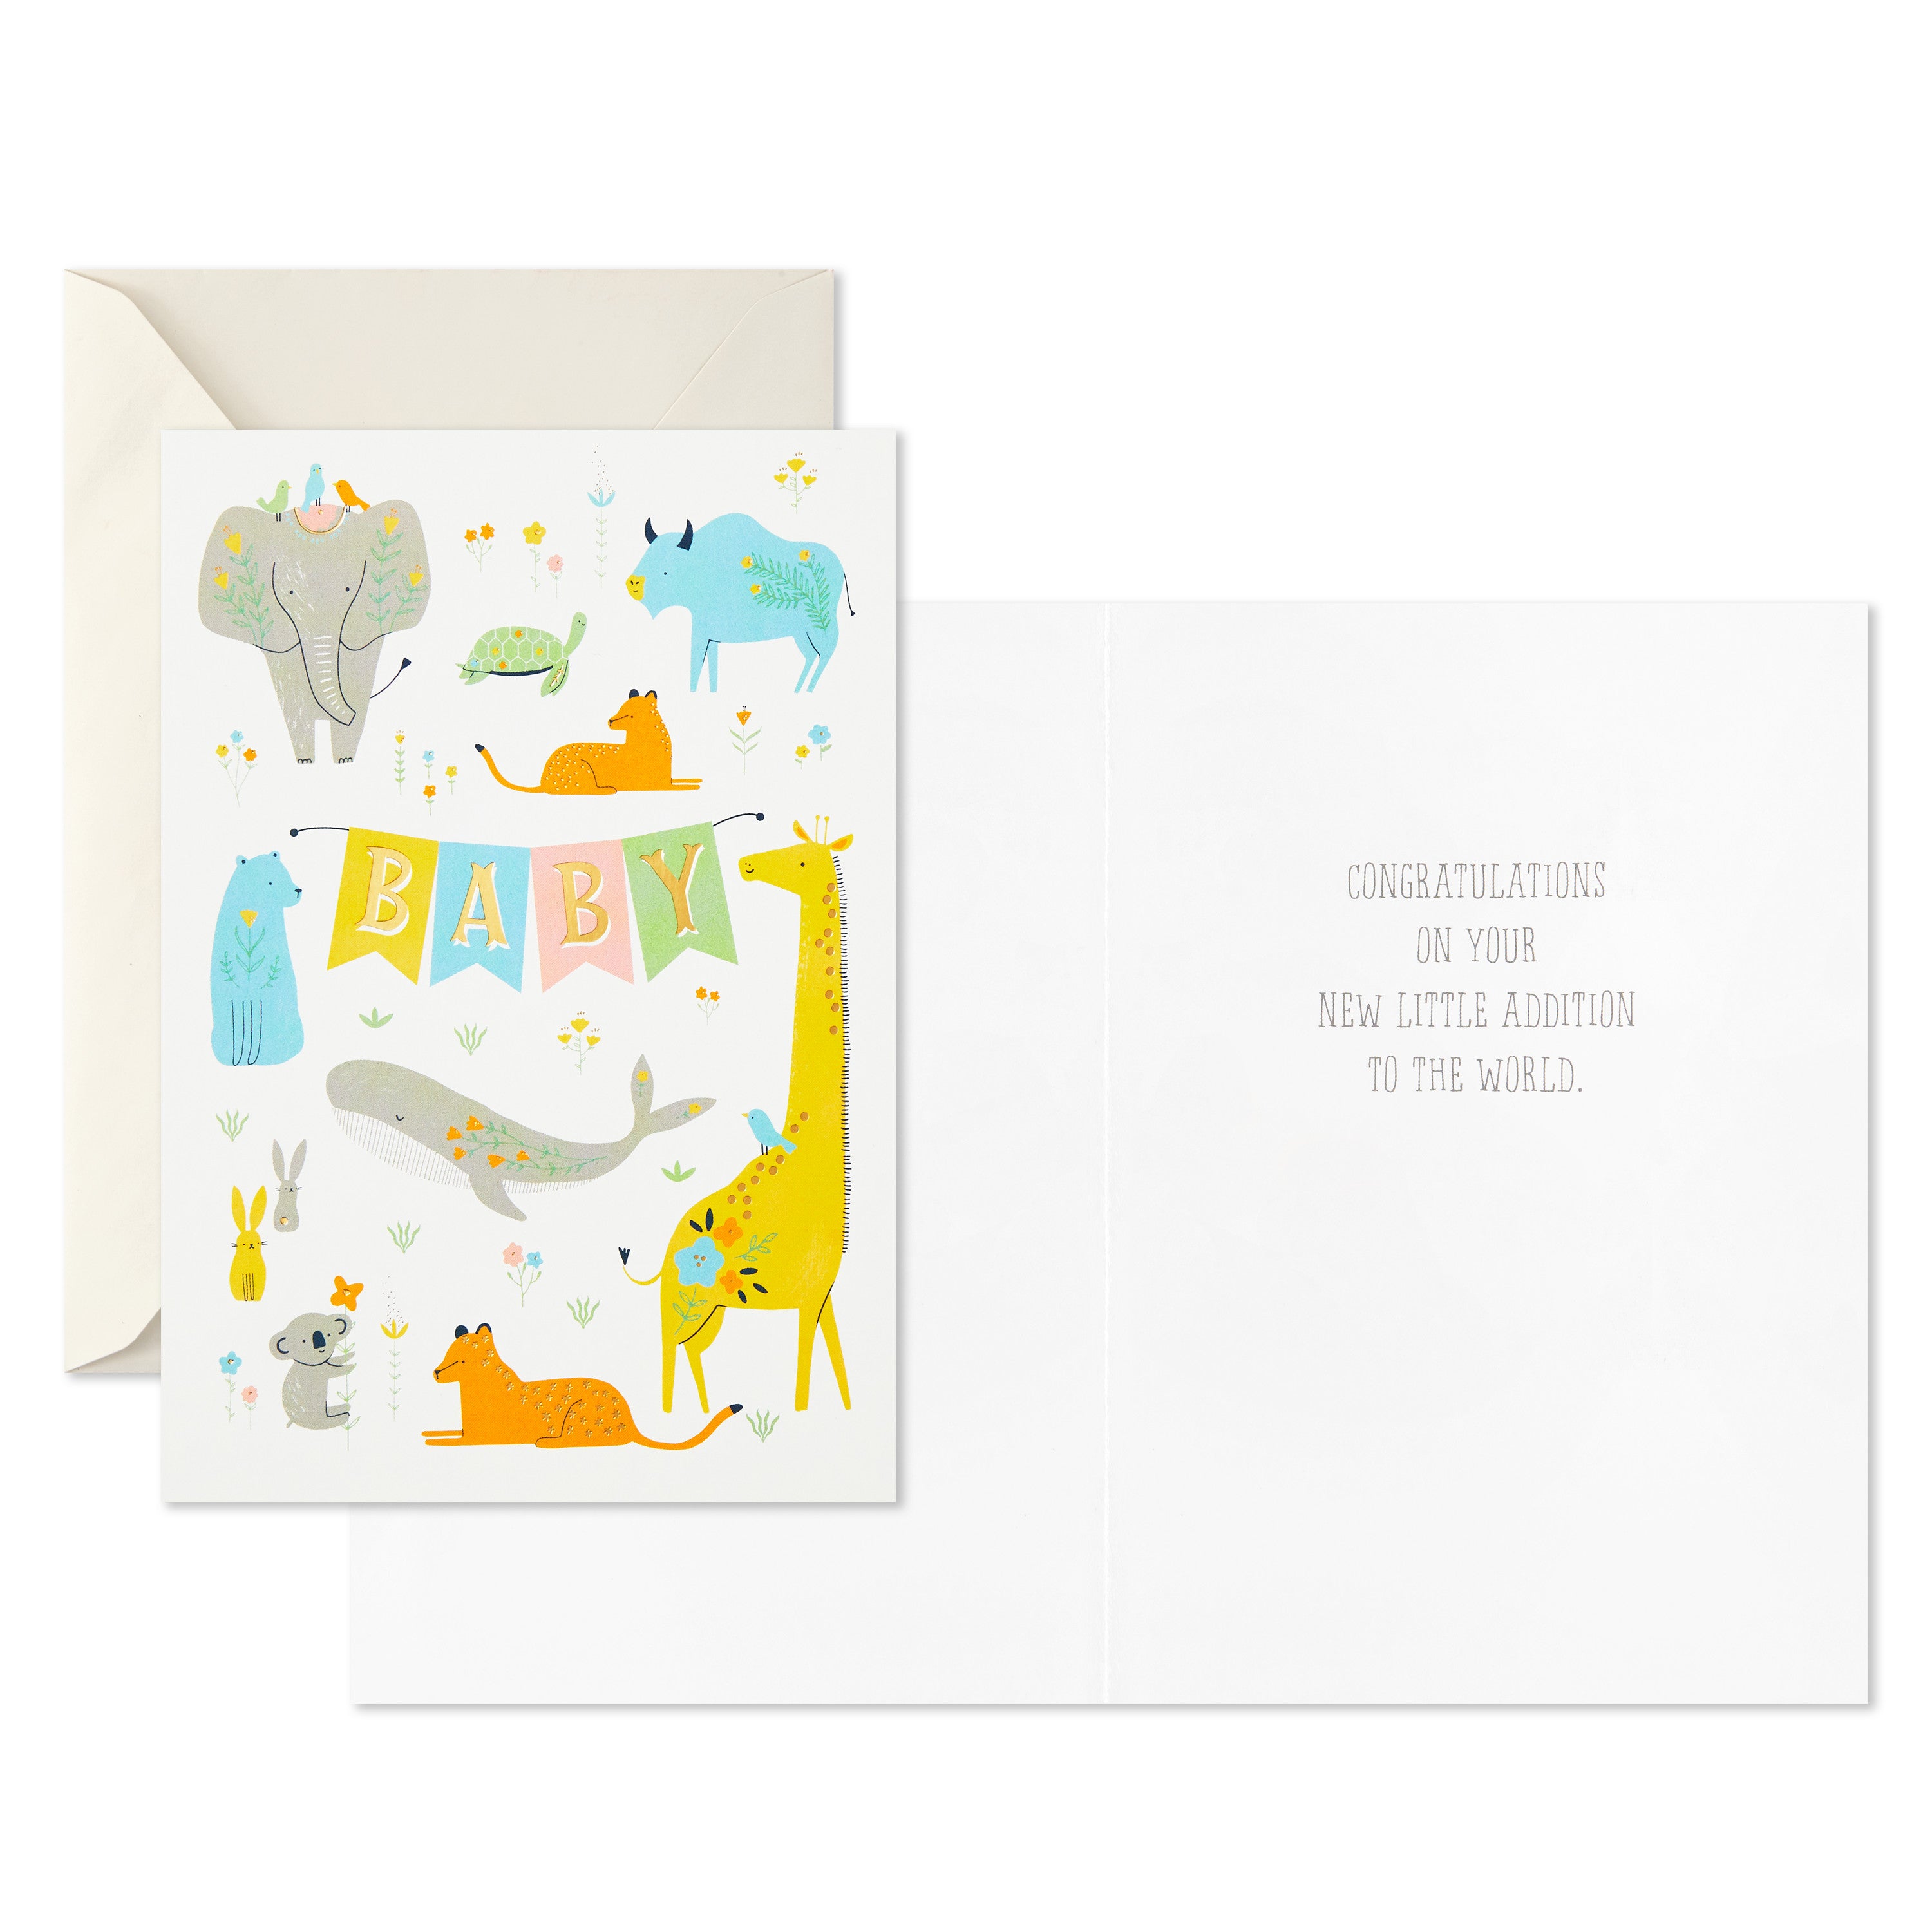 Baby Shower Cards Assortment, 12 Cards with Envelopes (Rabbits, Animals, Baby Boys, Baby Girls)